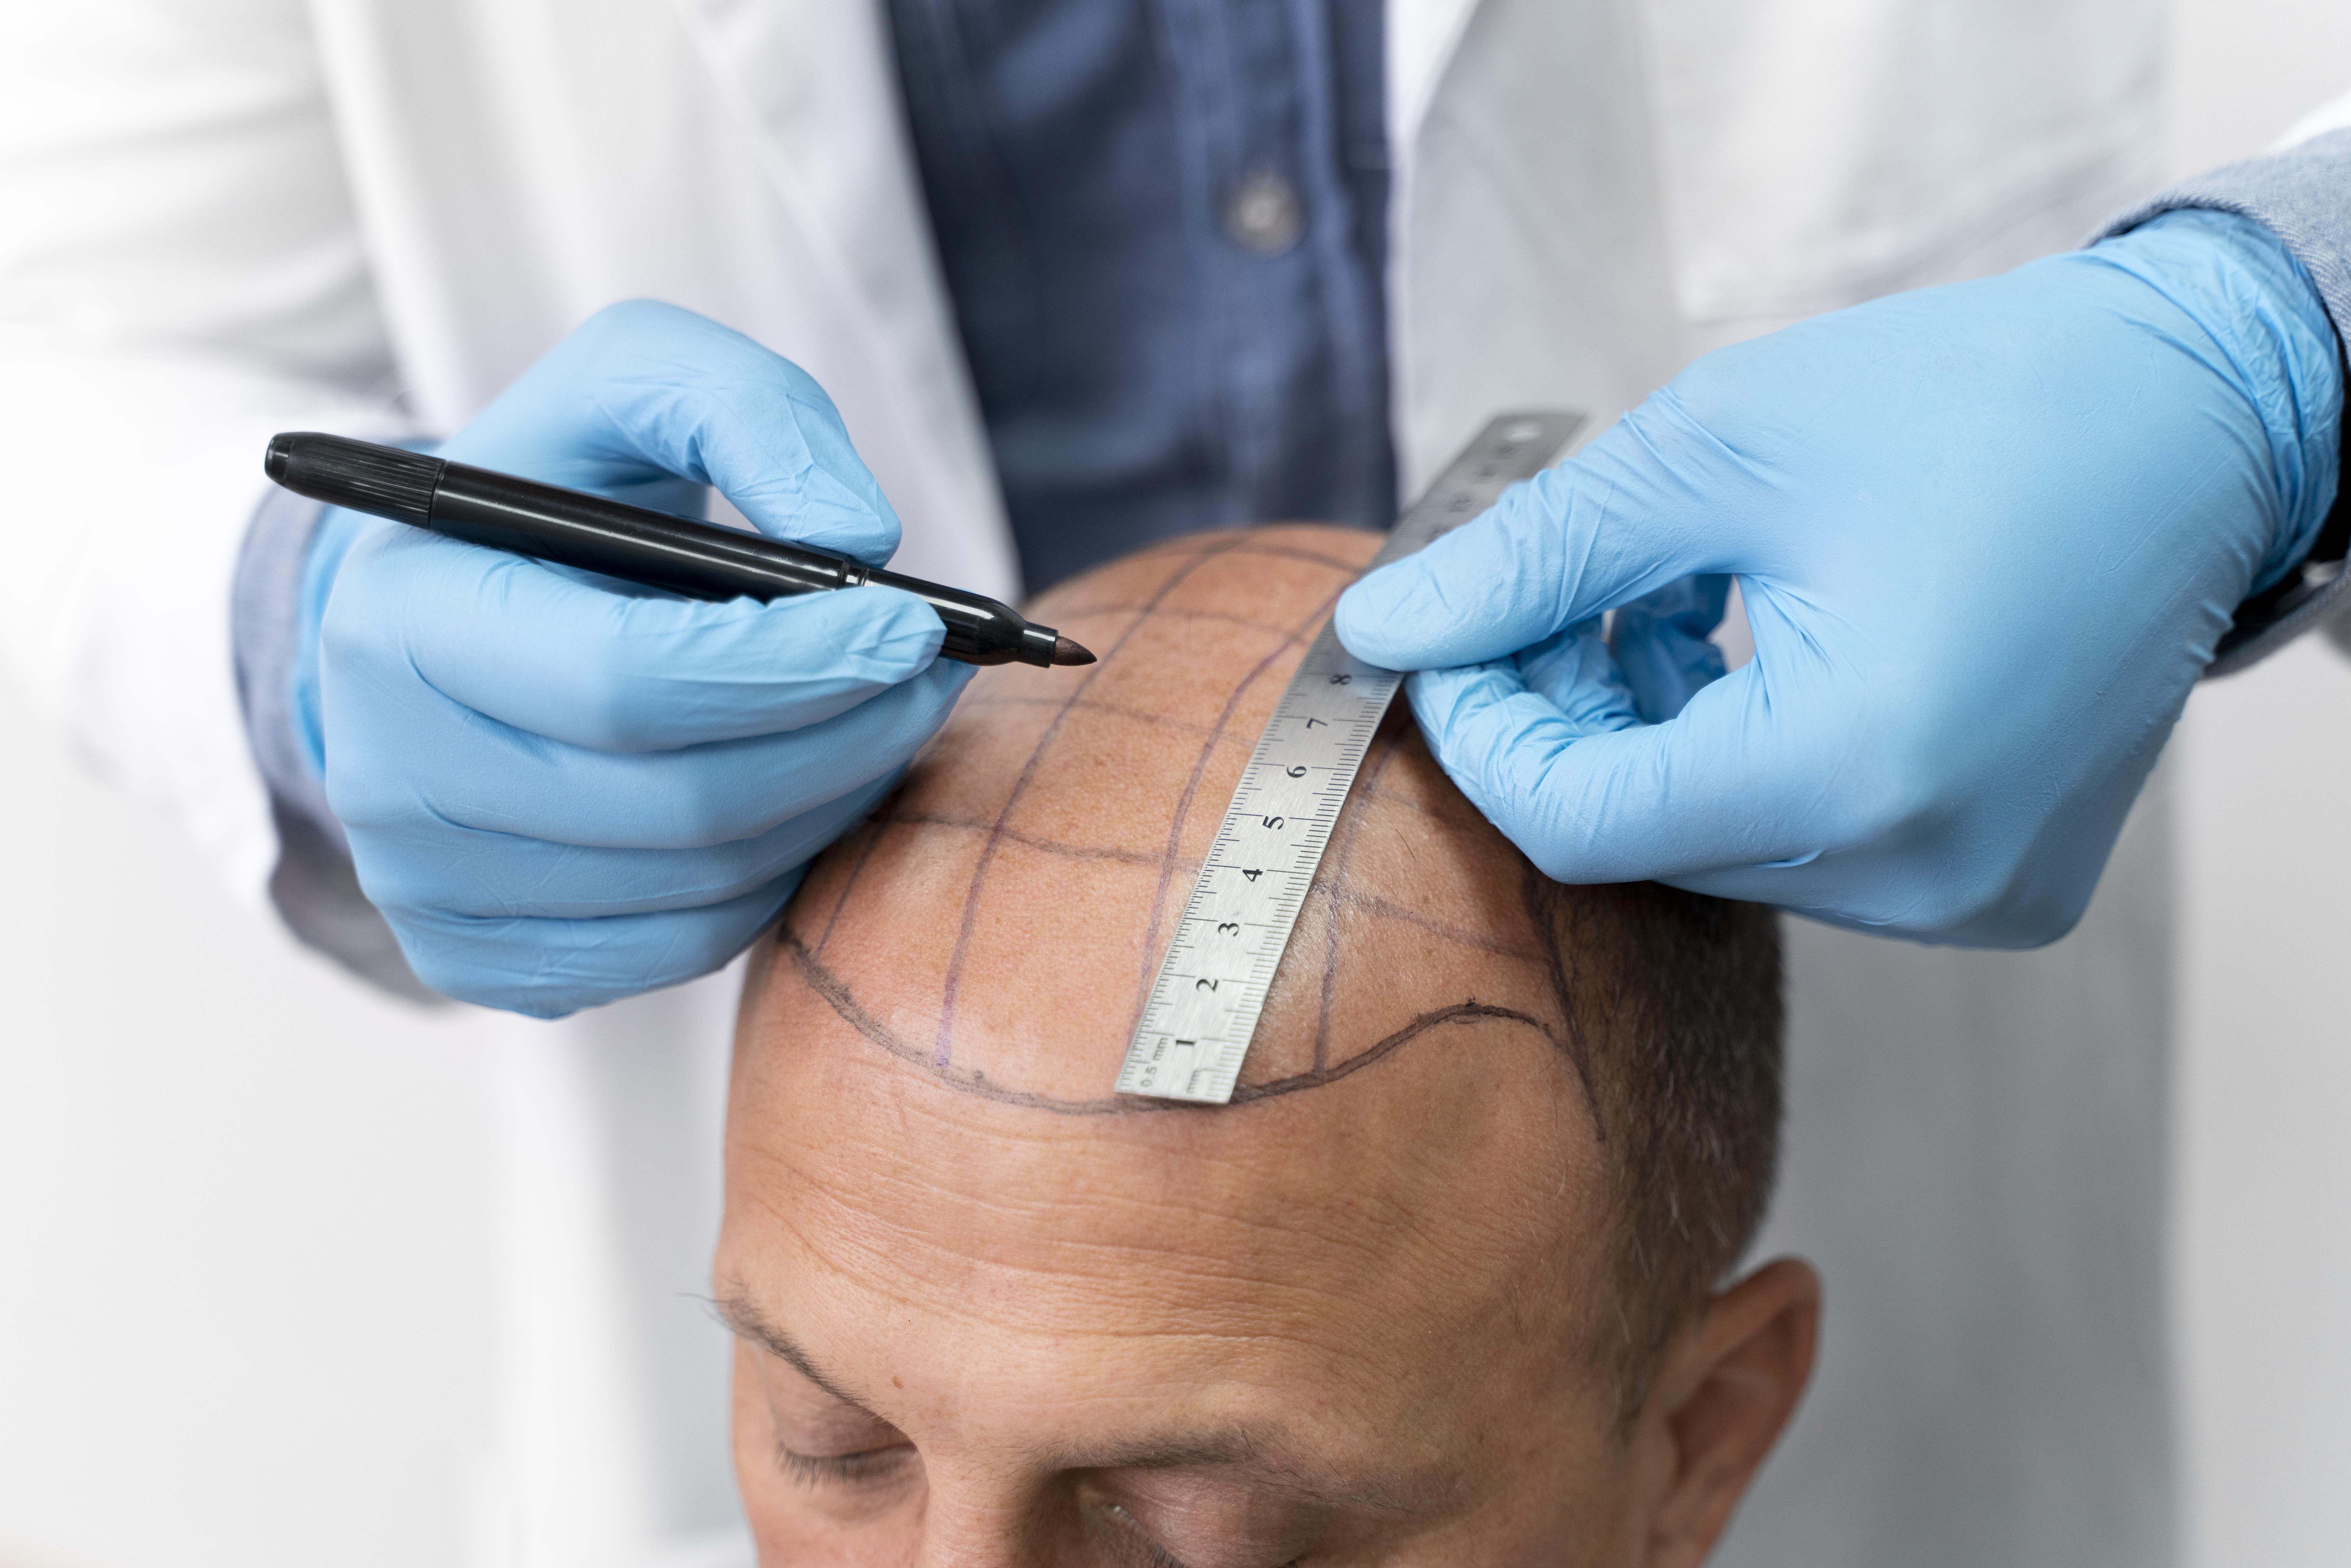 Post-Hair Transplant Care: Secrets to Caring for Your New Hair